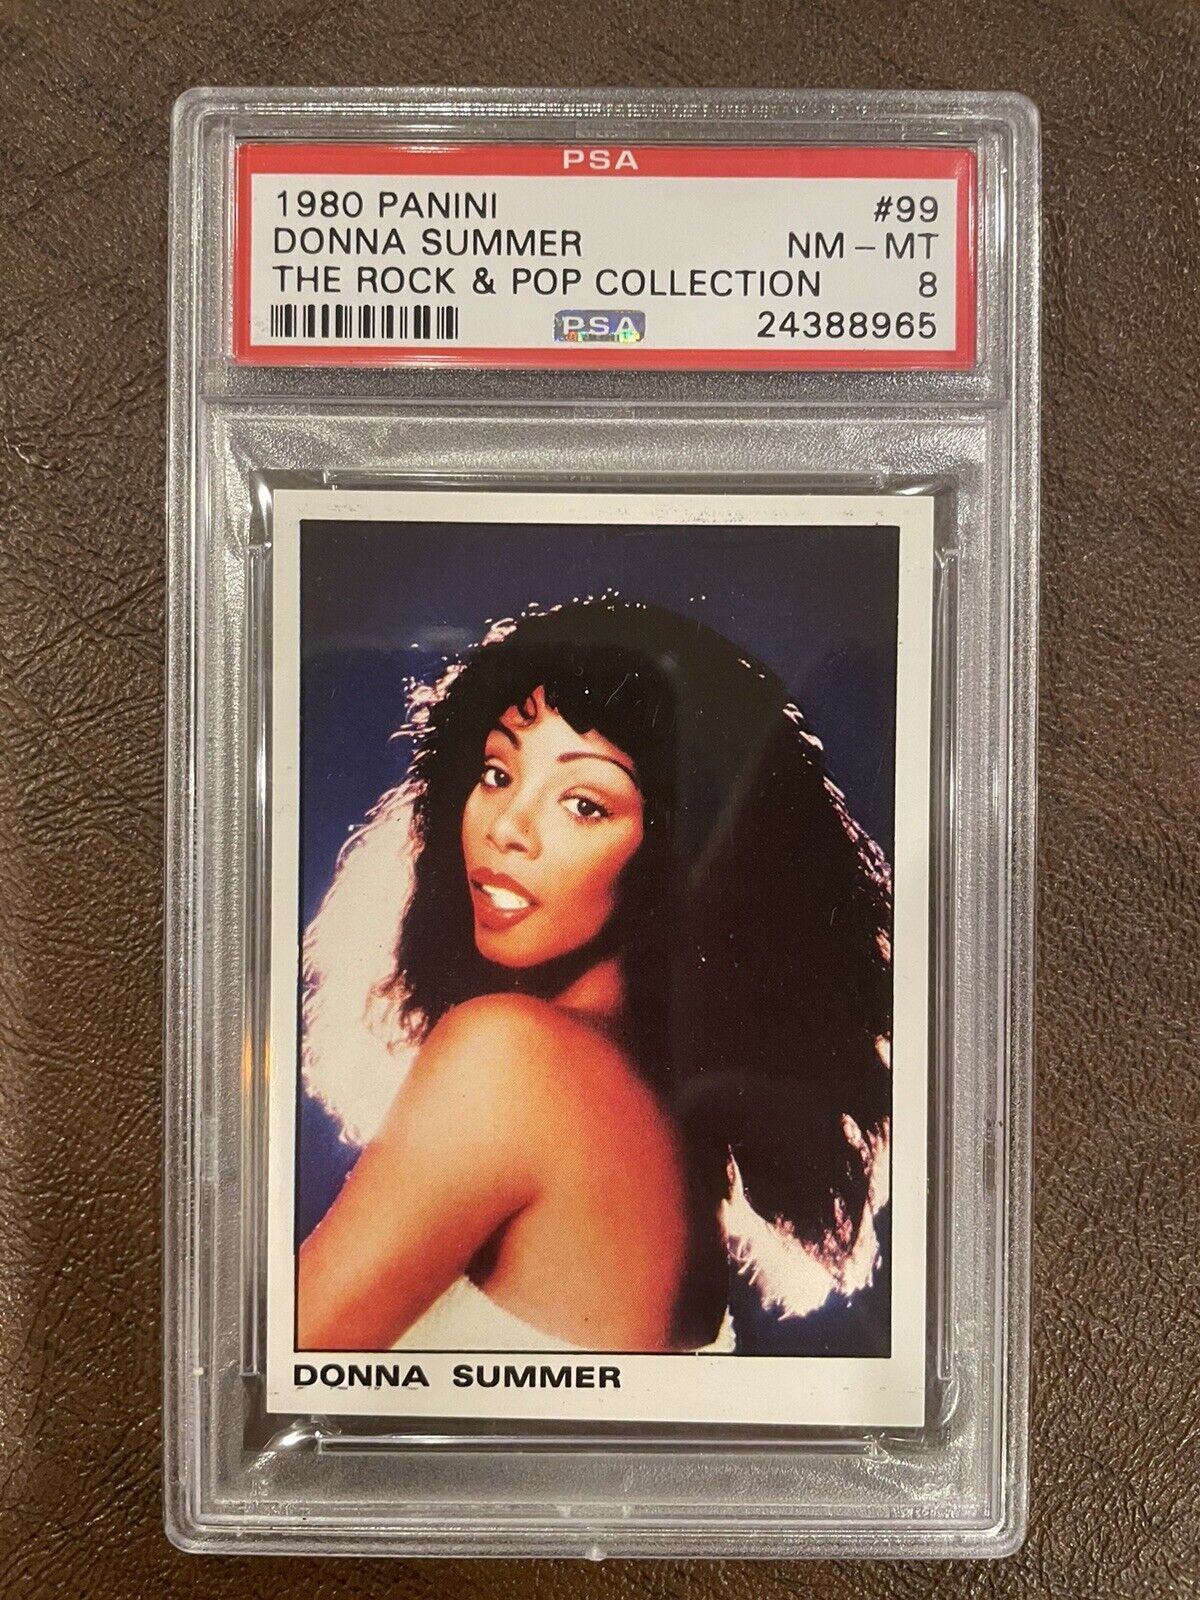 1980 Panini Italy DONNA SUMMER PSA 8 NM MT #99, no PSA 9s or PSA 10s,Highest Grd